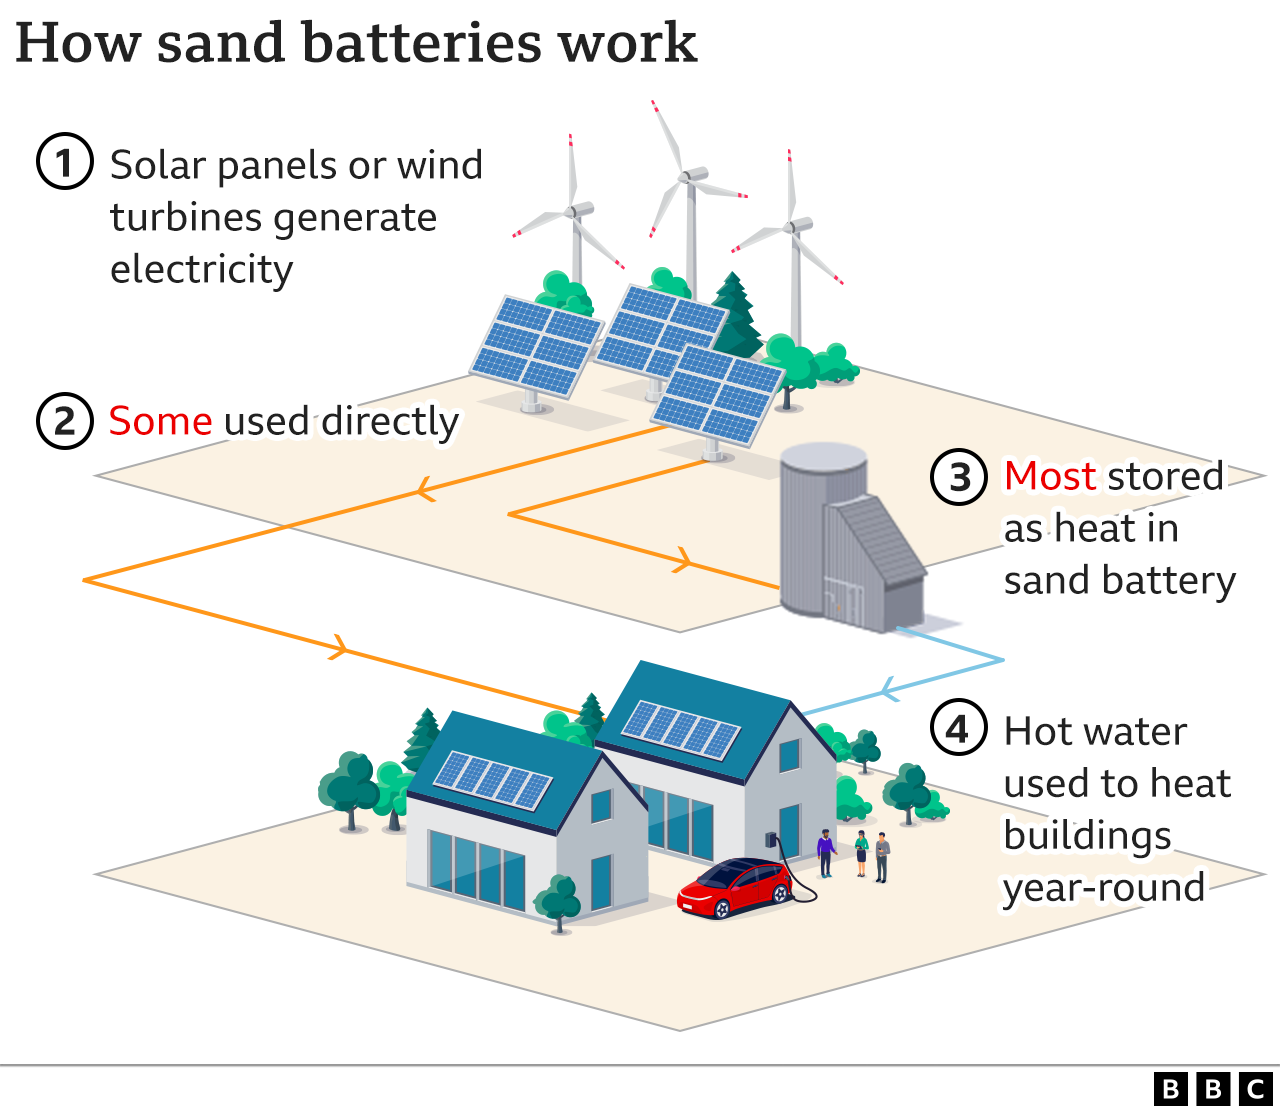 how sand batteries work